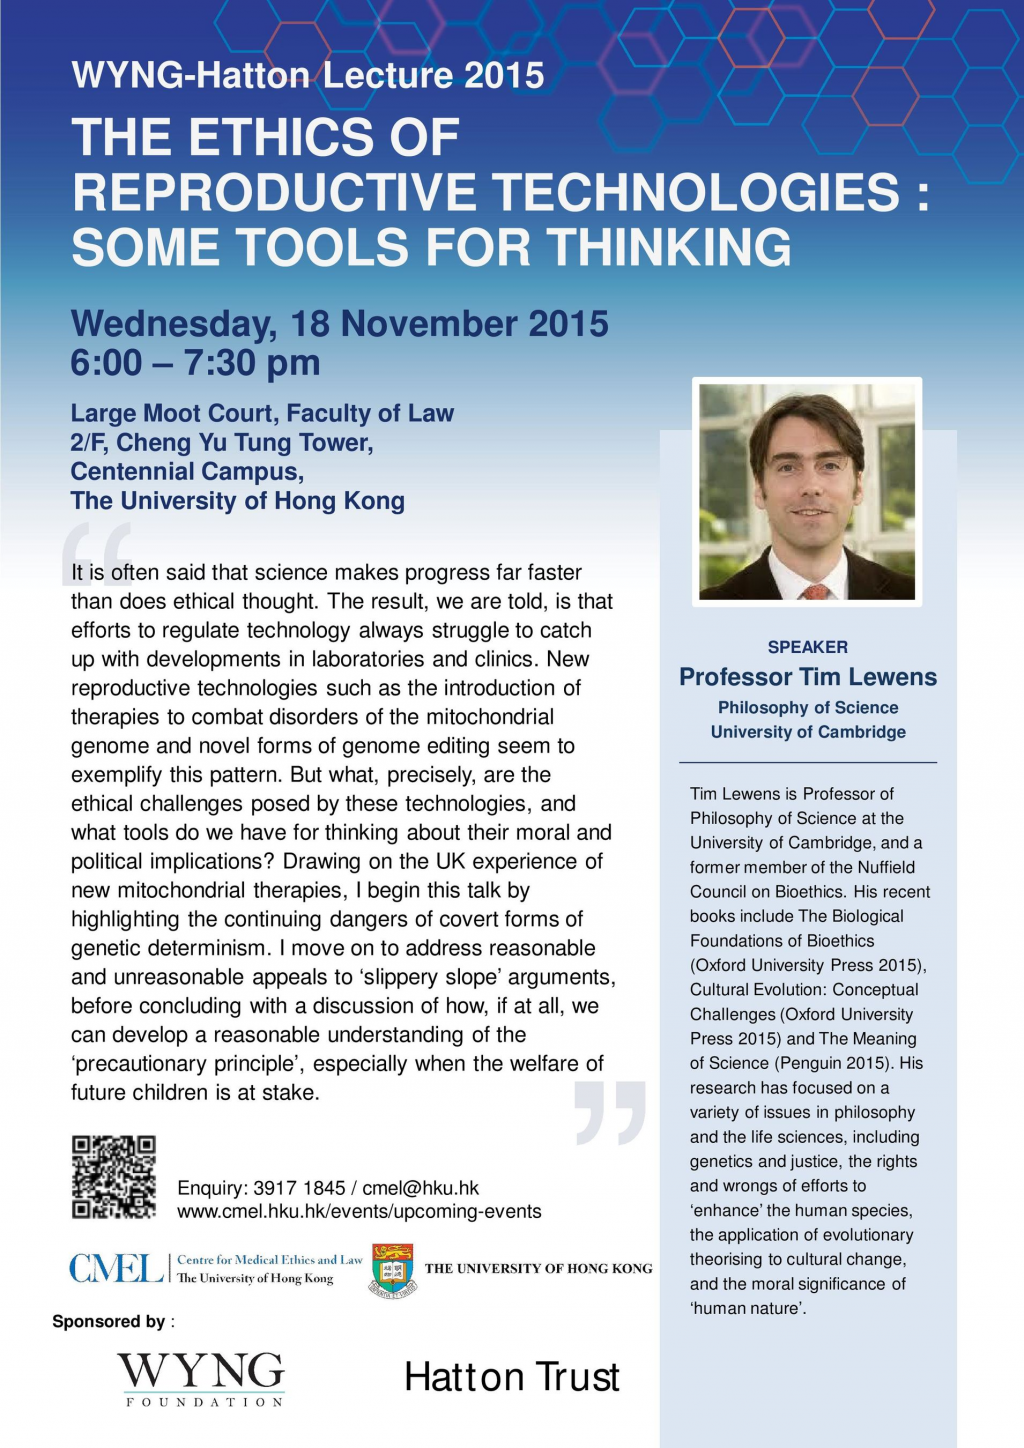 WYNG-Hatton Lecture 2015 : 'The Ethics of Reproductive Technologies: Some Tools for Thinking'